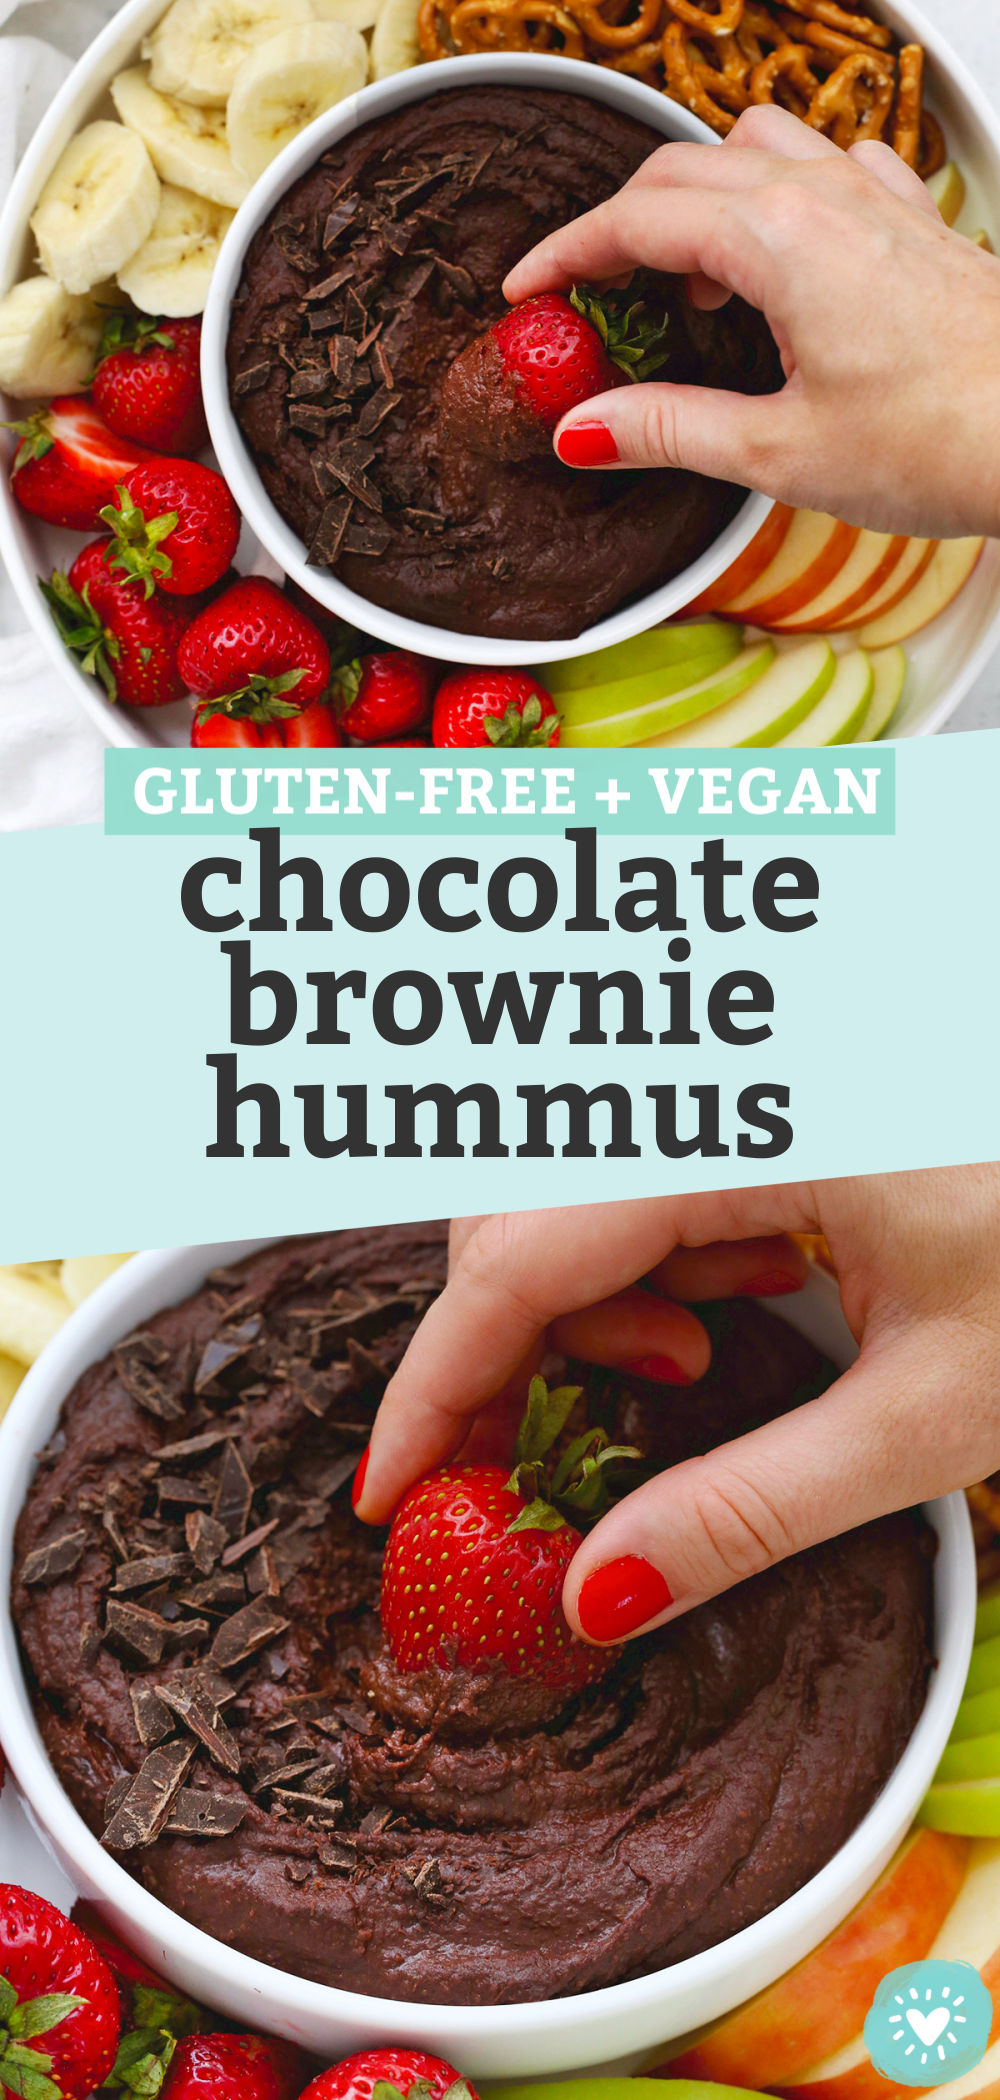 Two photos of chocolate brownie hummus on a fruit plate with text overlay that reads "Gluten-Free + Vegan Chocolate Brownie Hummus"